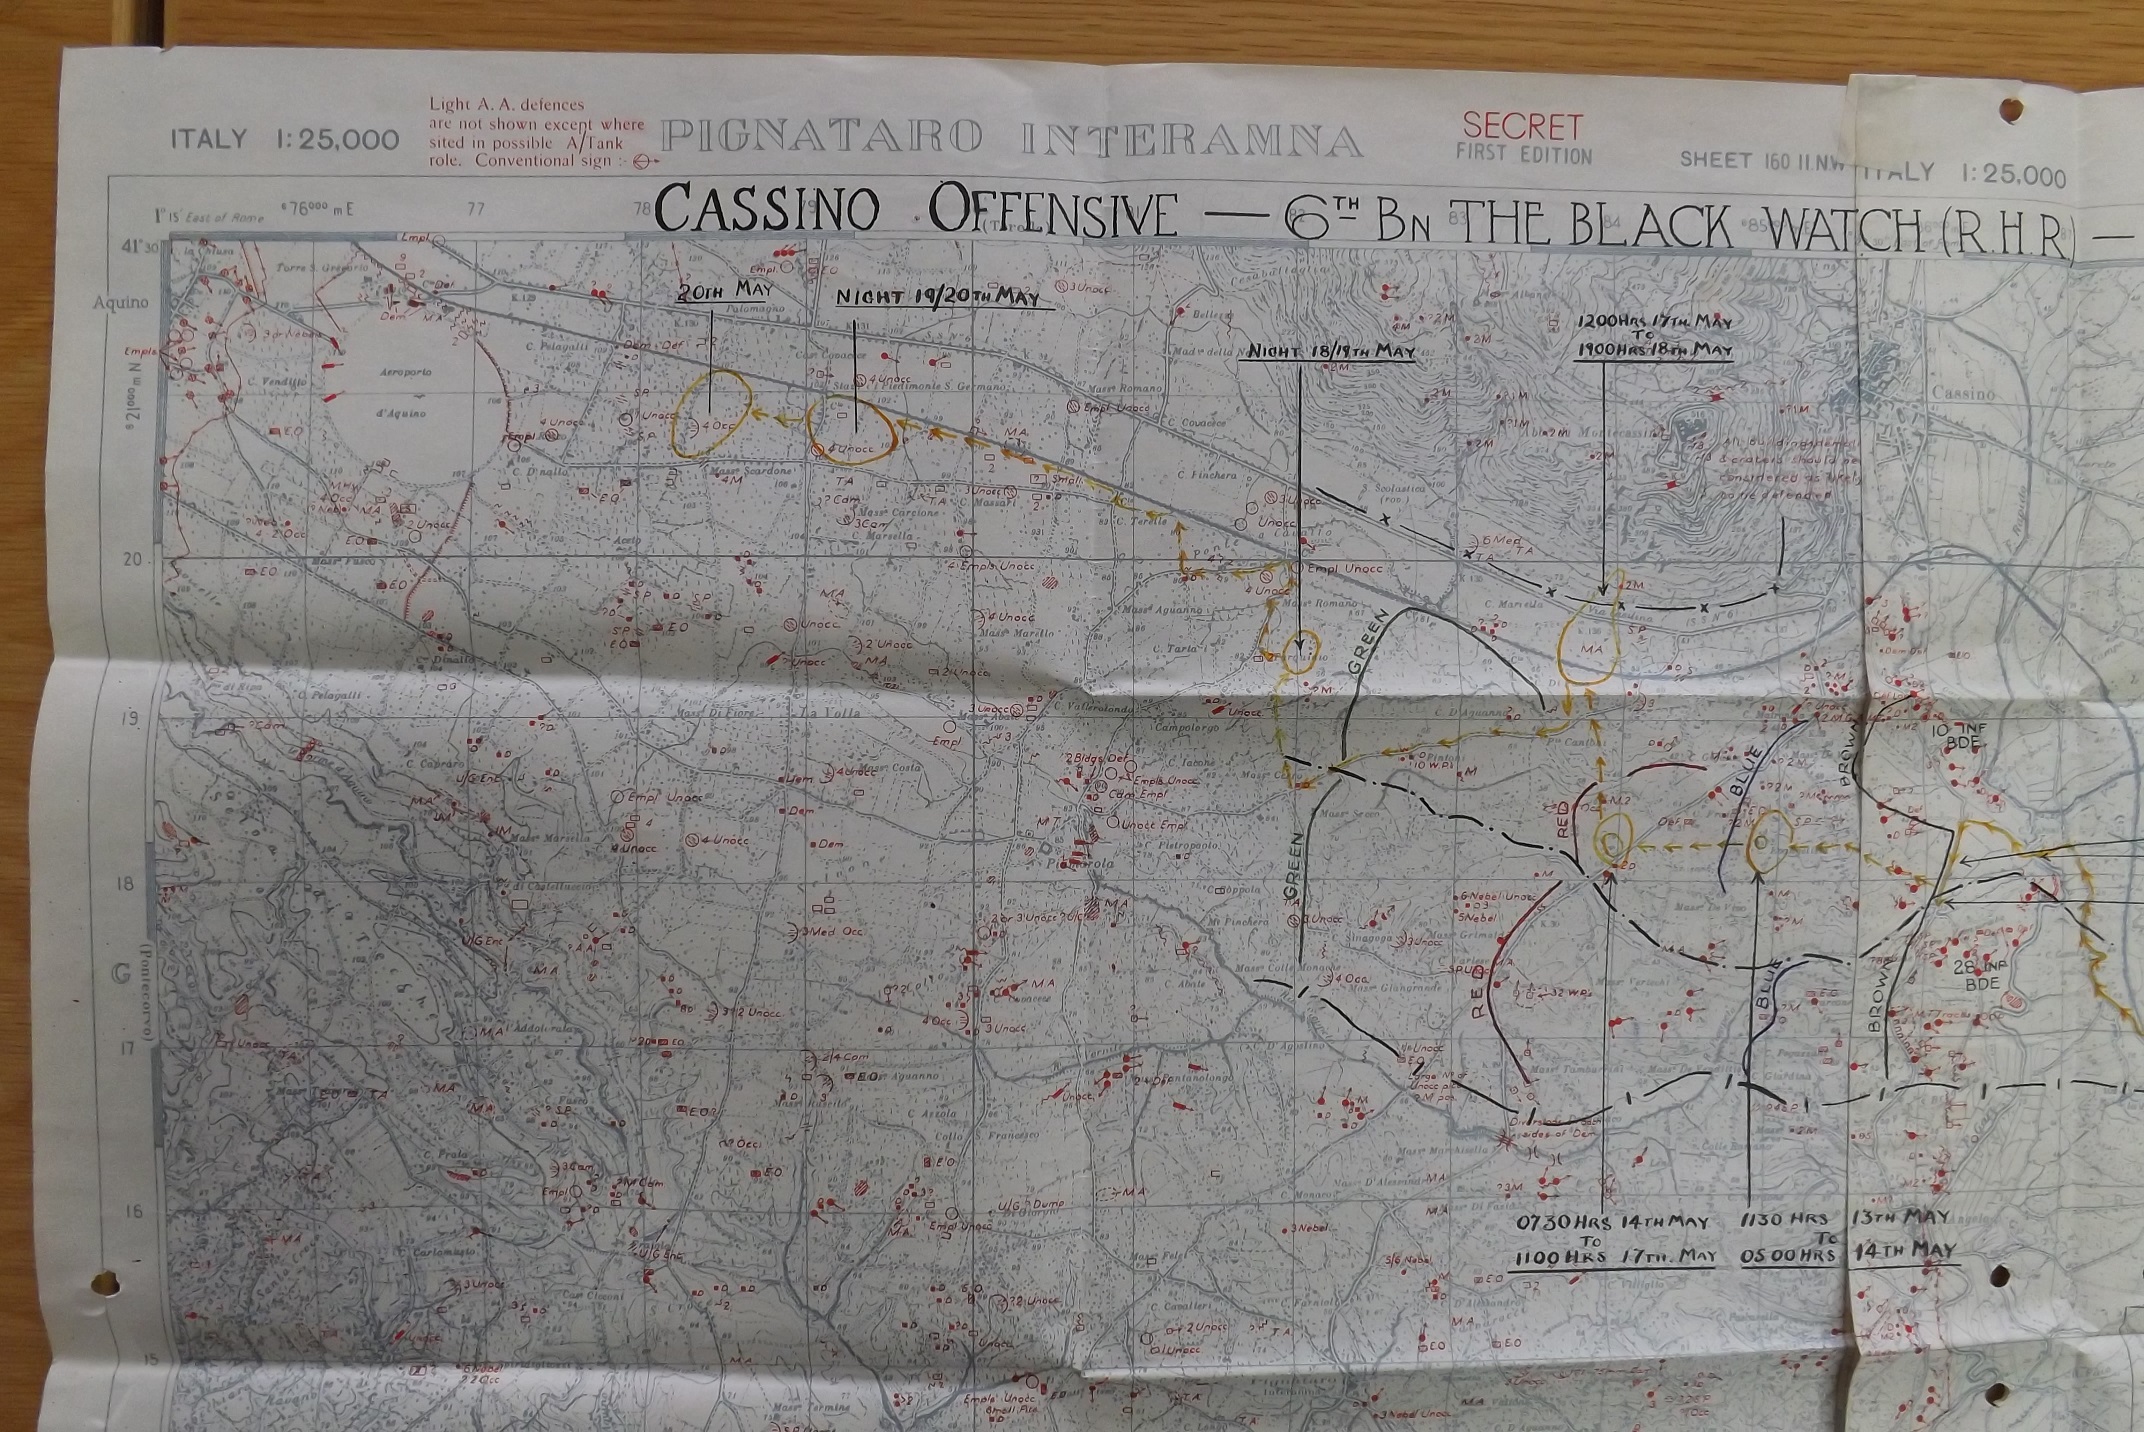 Extract from 6 Bn Black Watch Cassino Battle Map